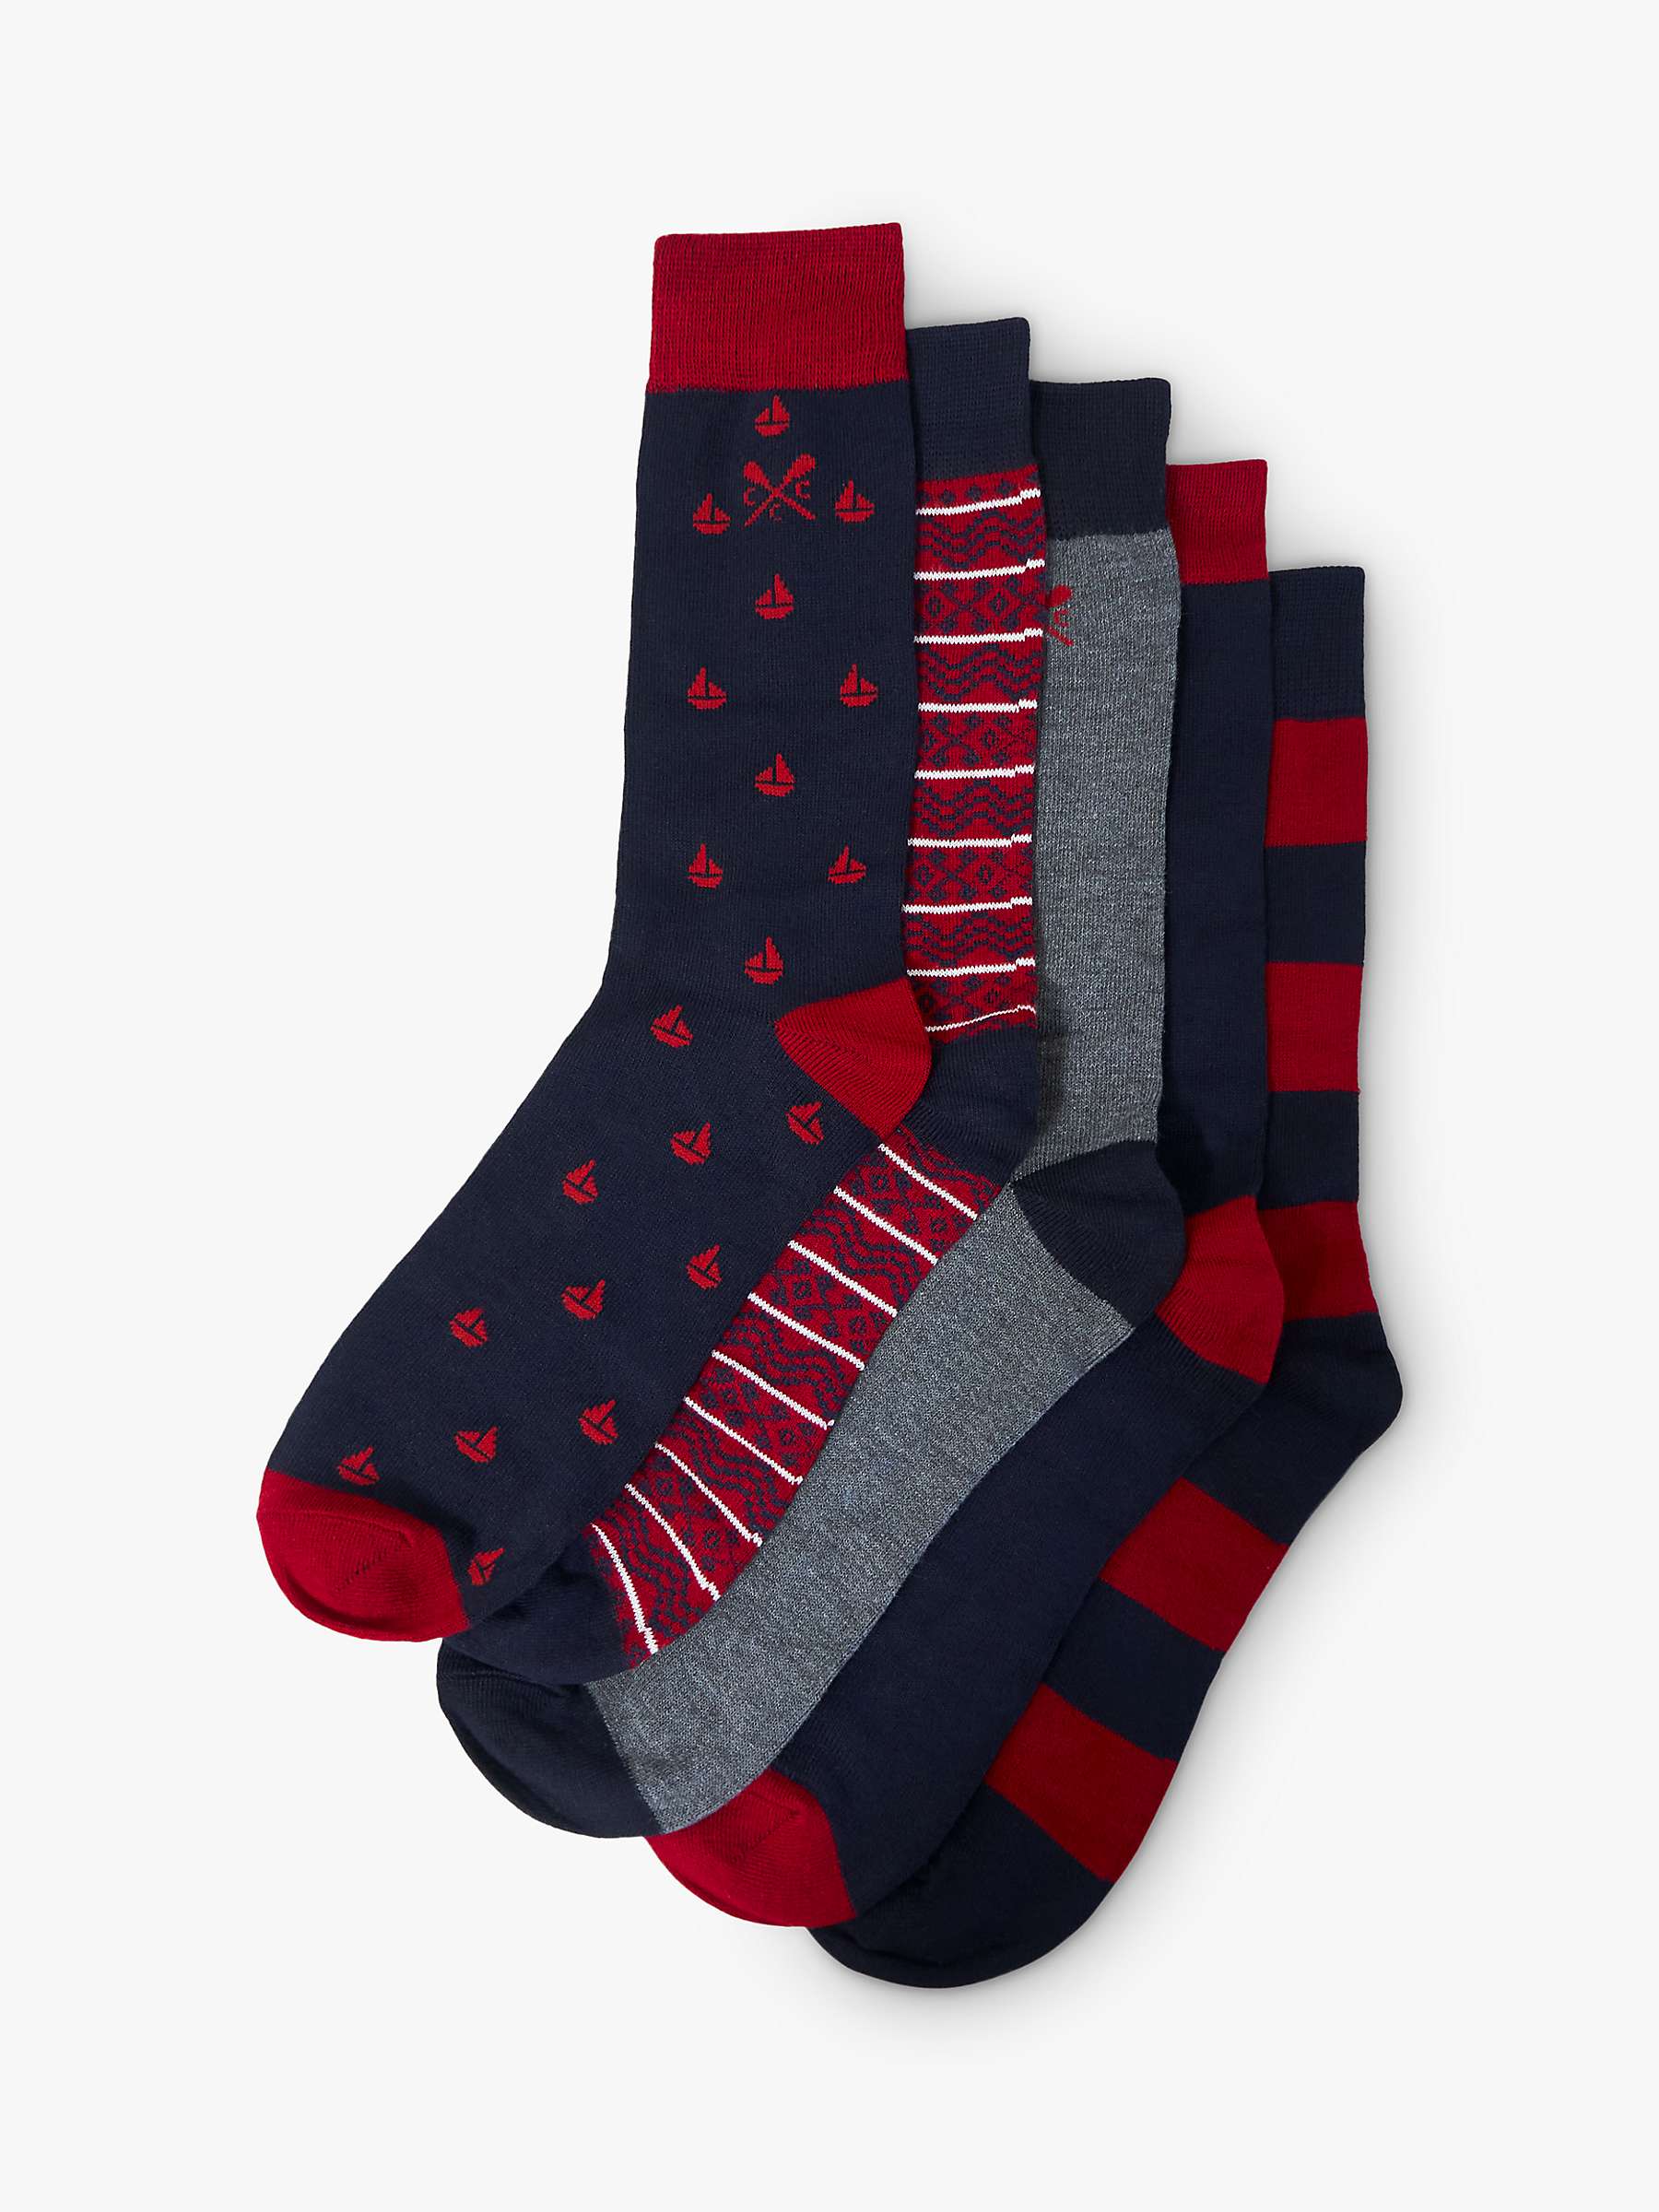 Buy Crew Clothing Bamboo Socks Box, Pack of 5, Red/Multi Online at johnlewis.com